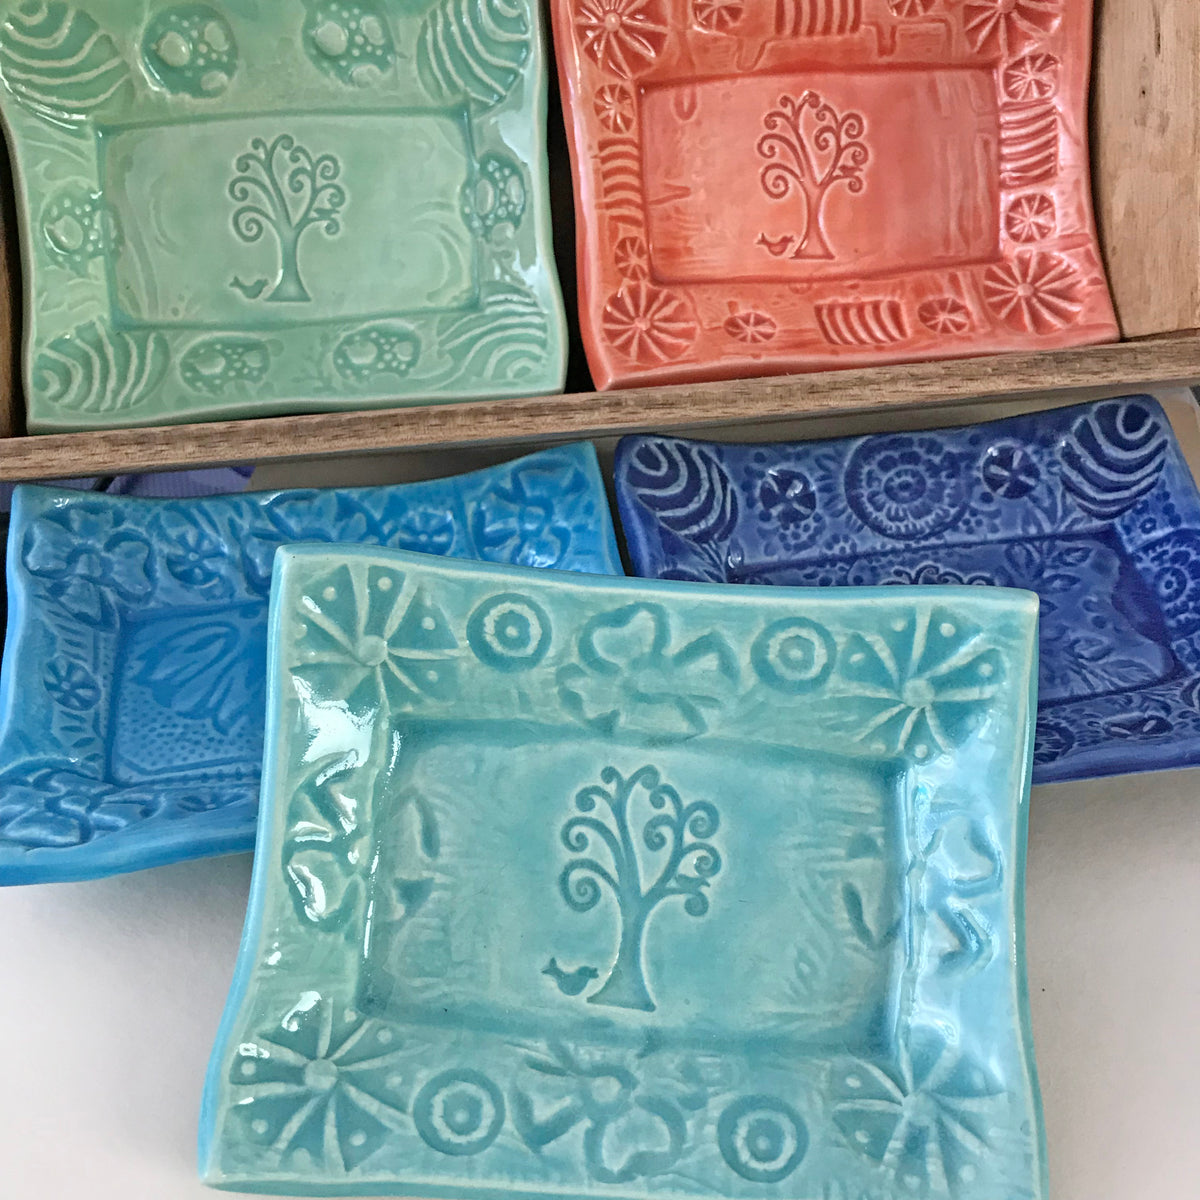 Tree of Life Design hand impressed into clay, then glazed with bright colors to enhance the texture.  Often used as a small tray for appetizers.rs